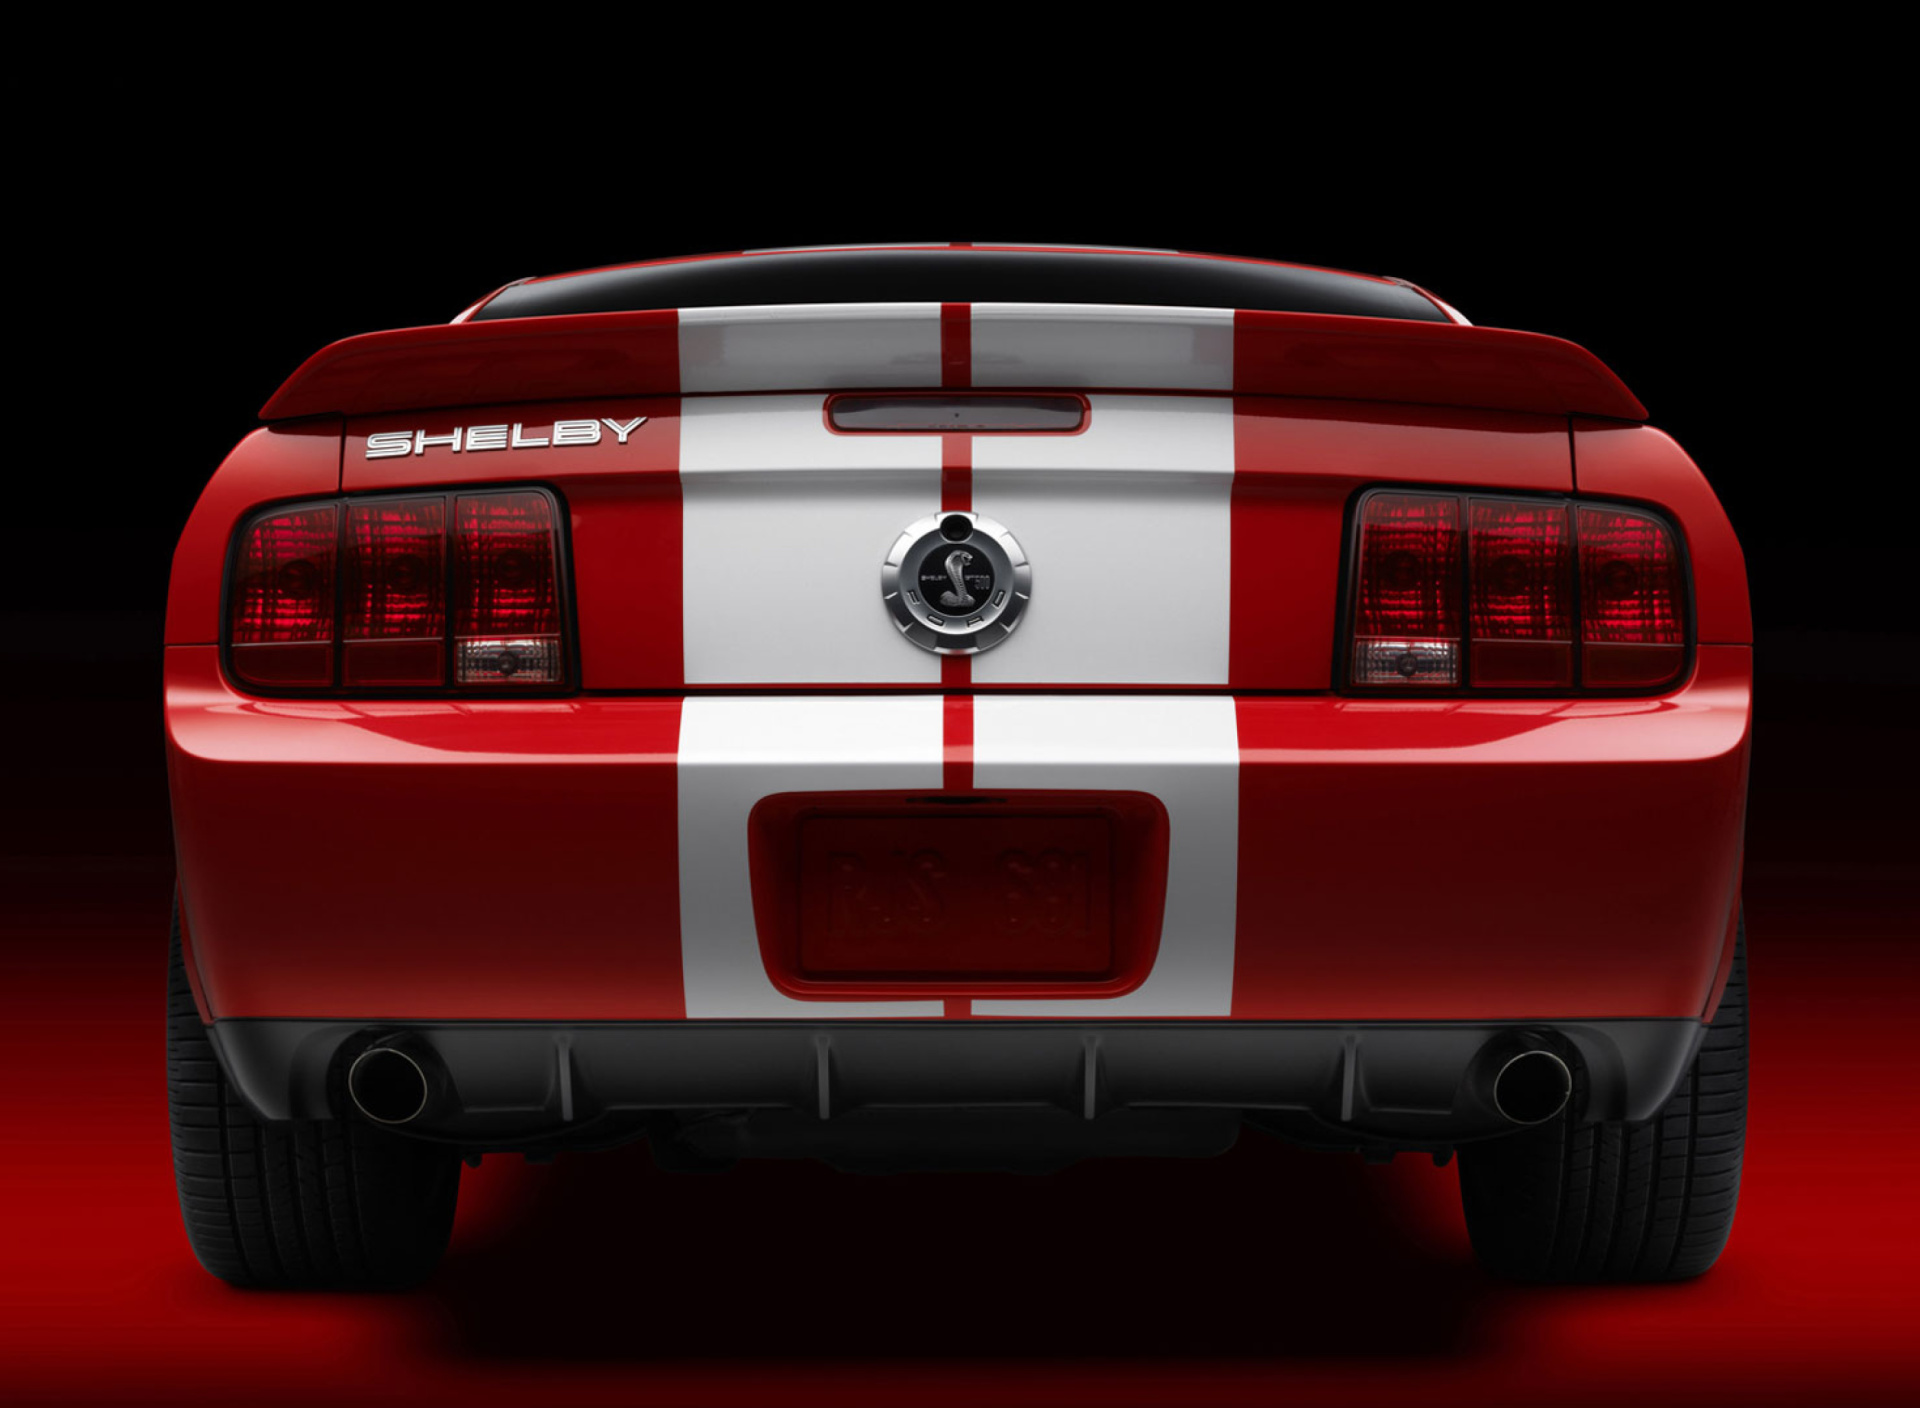 Das Ford Mustang Shelby GT500 Wallpaper 1920x1408